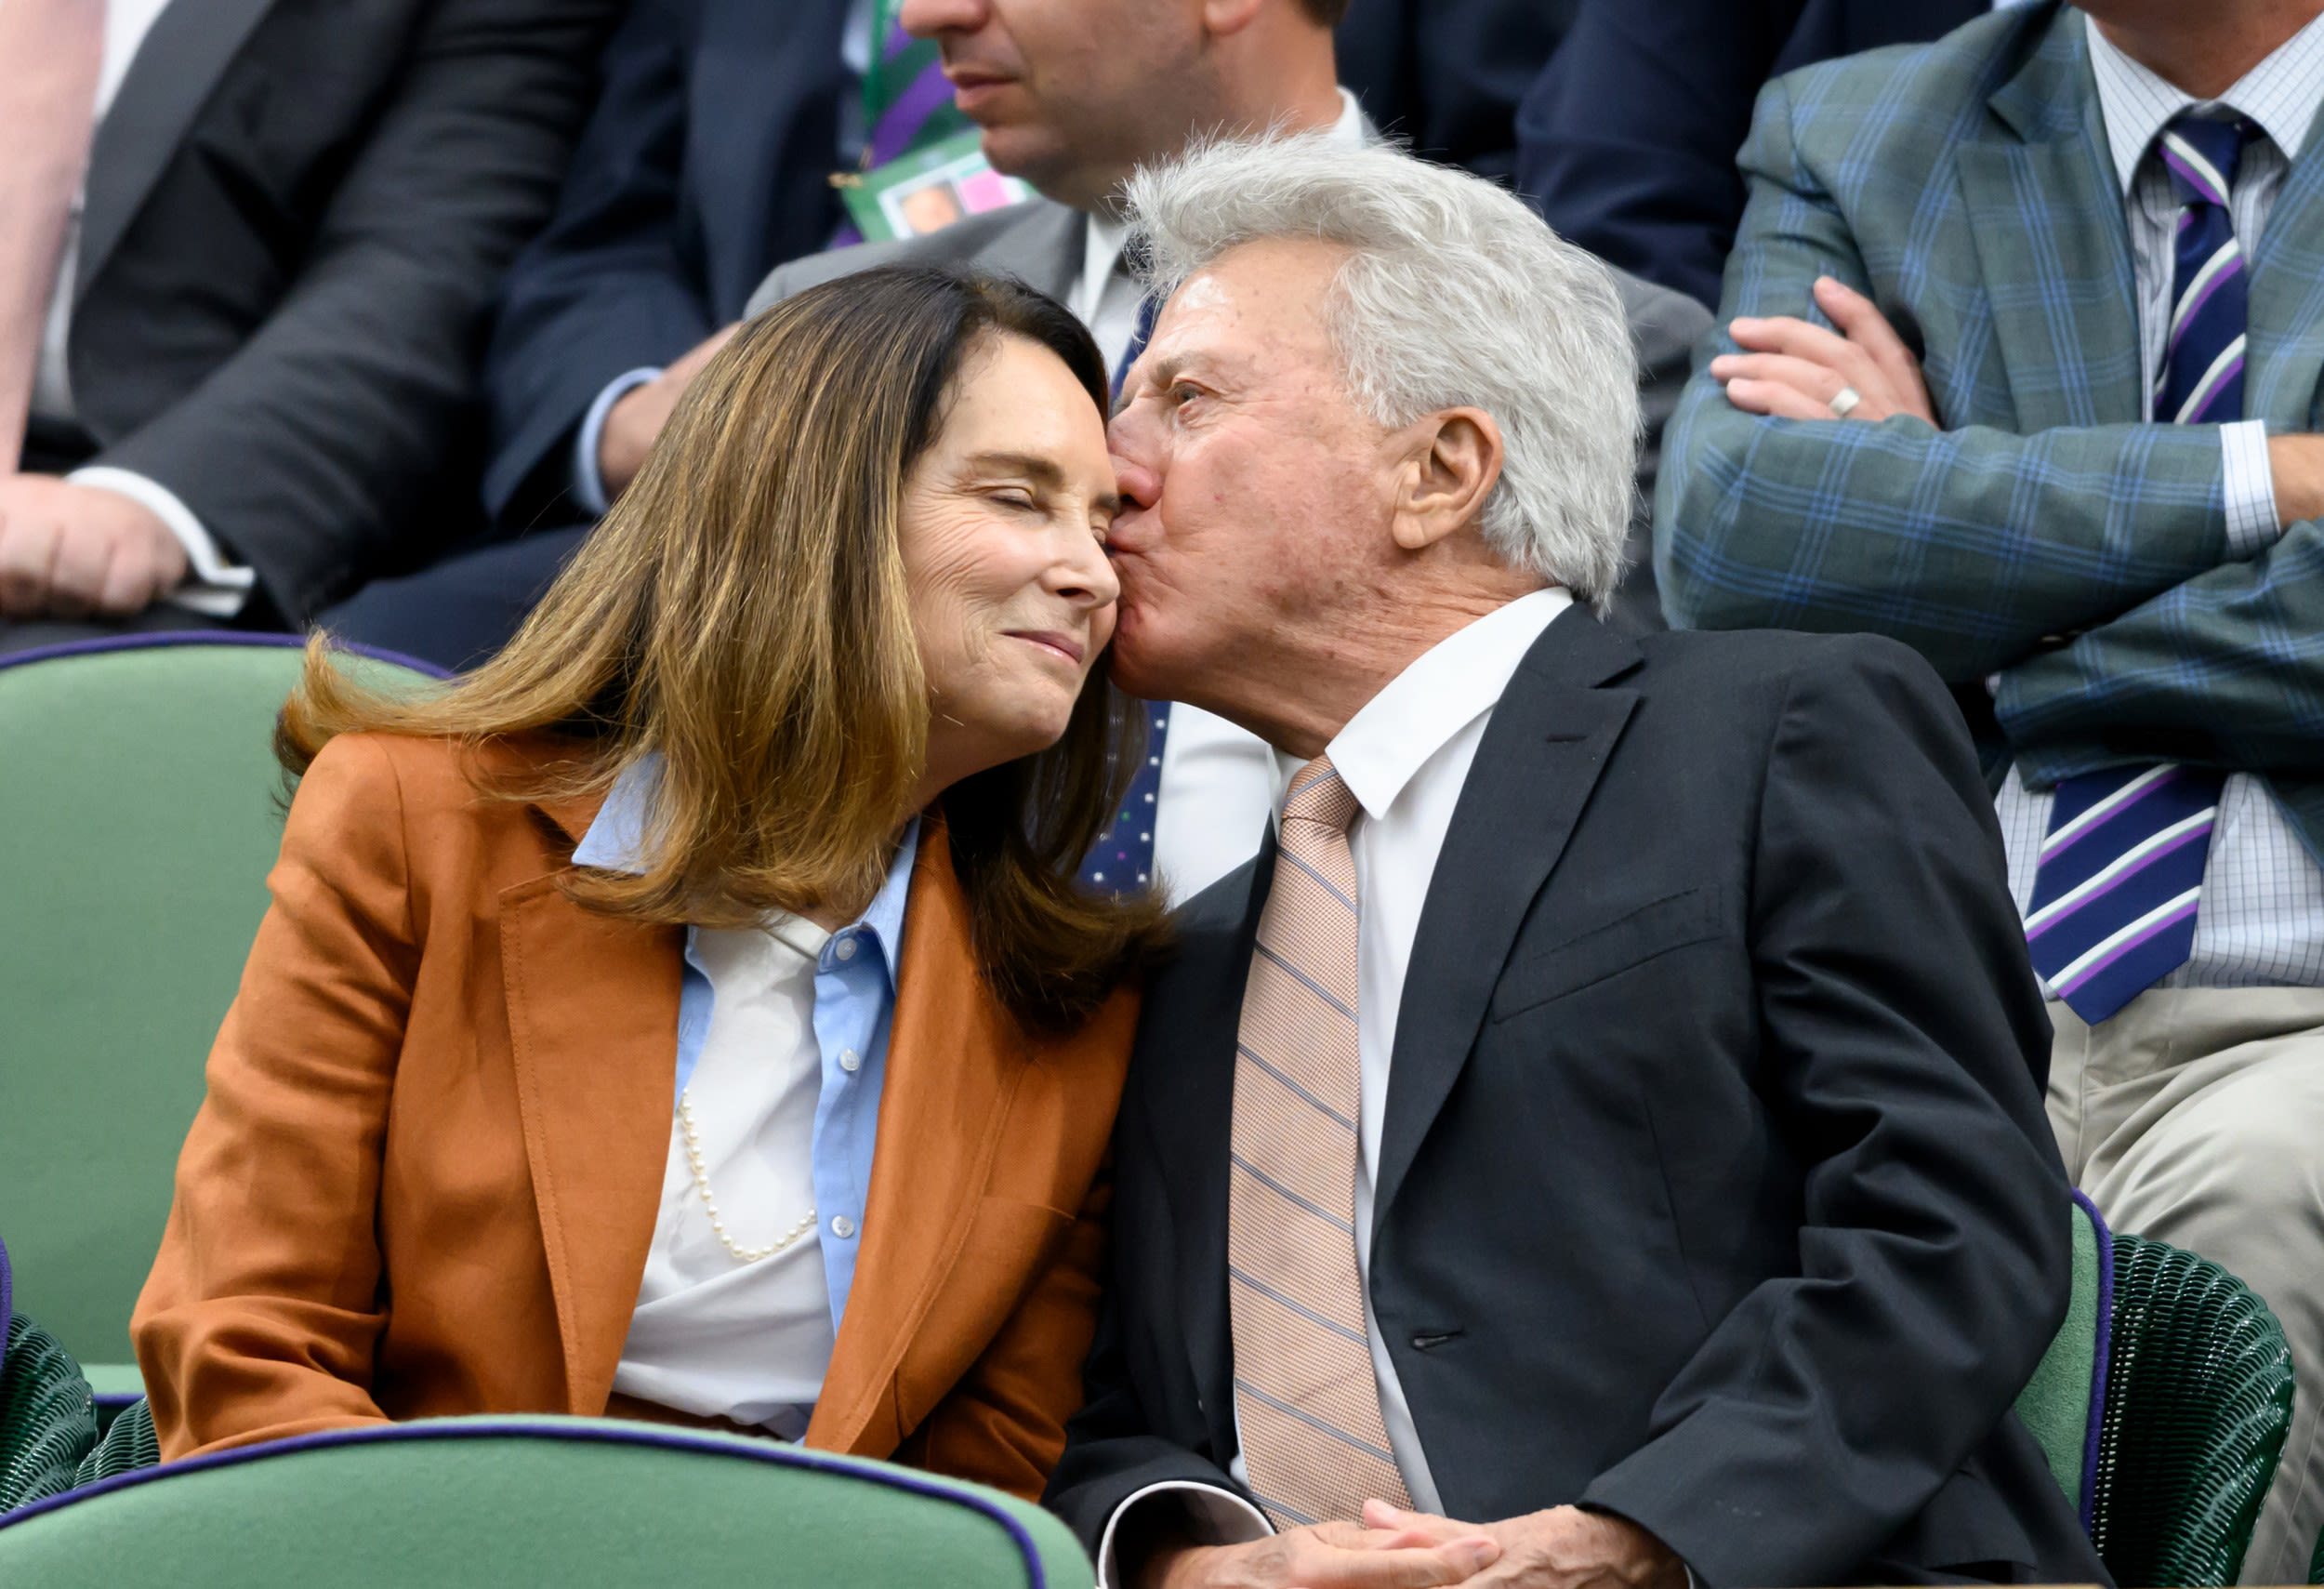 Dustin Hoffman, 86, shares rare PDA moment with wife Lisa, 69